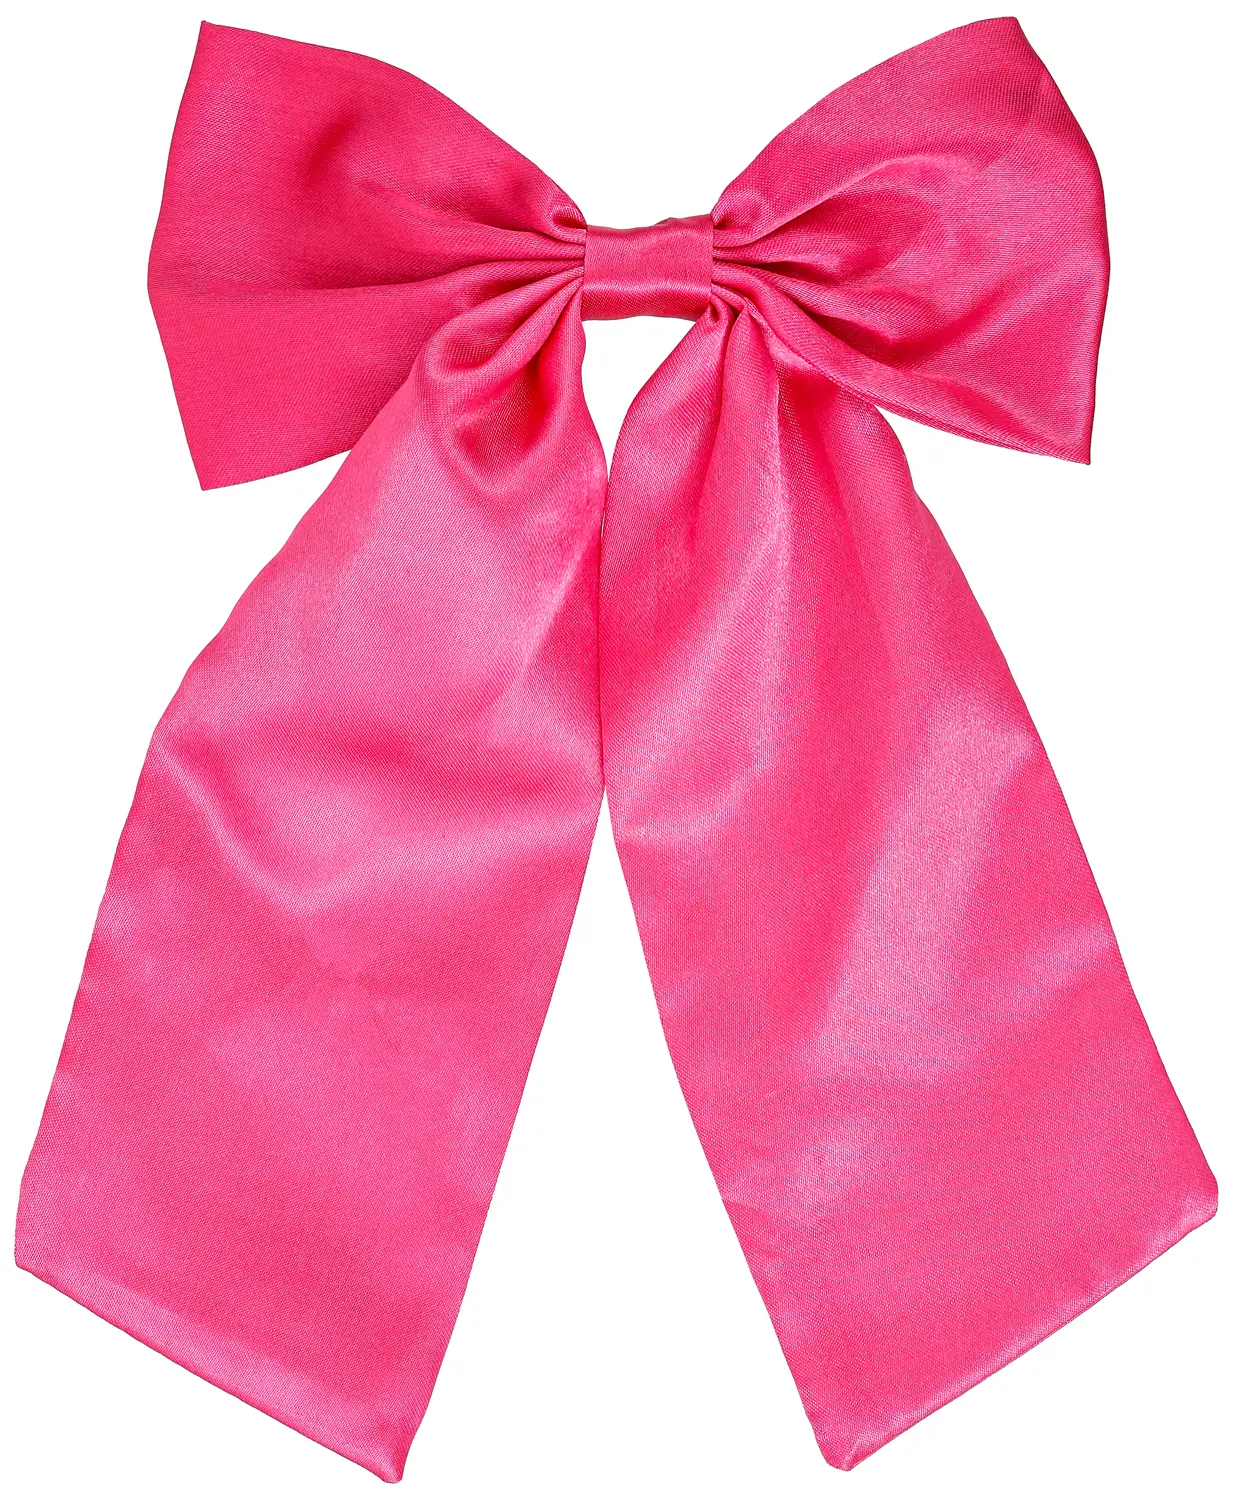 Fermacapelli - Pink Bow